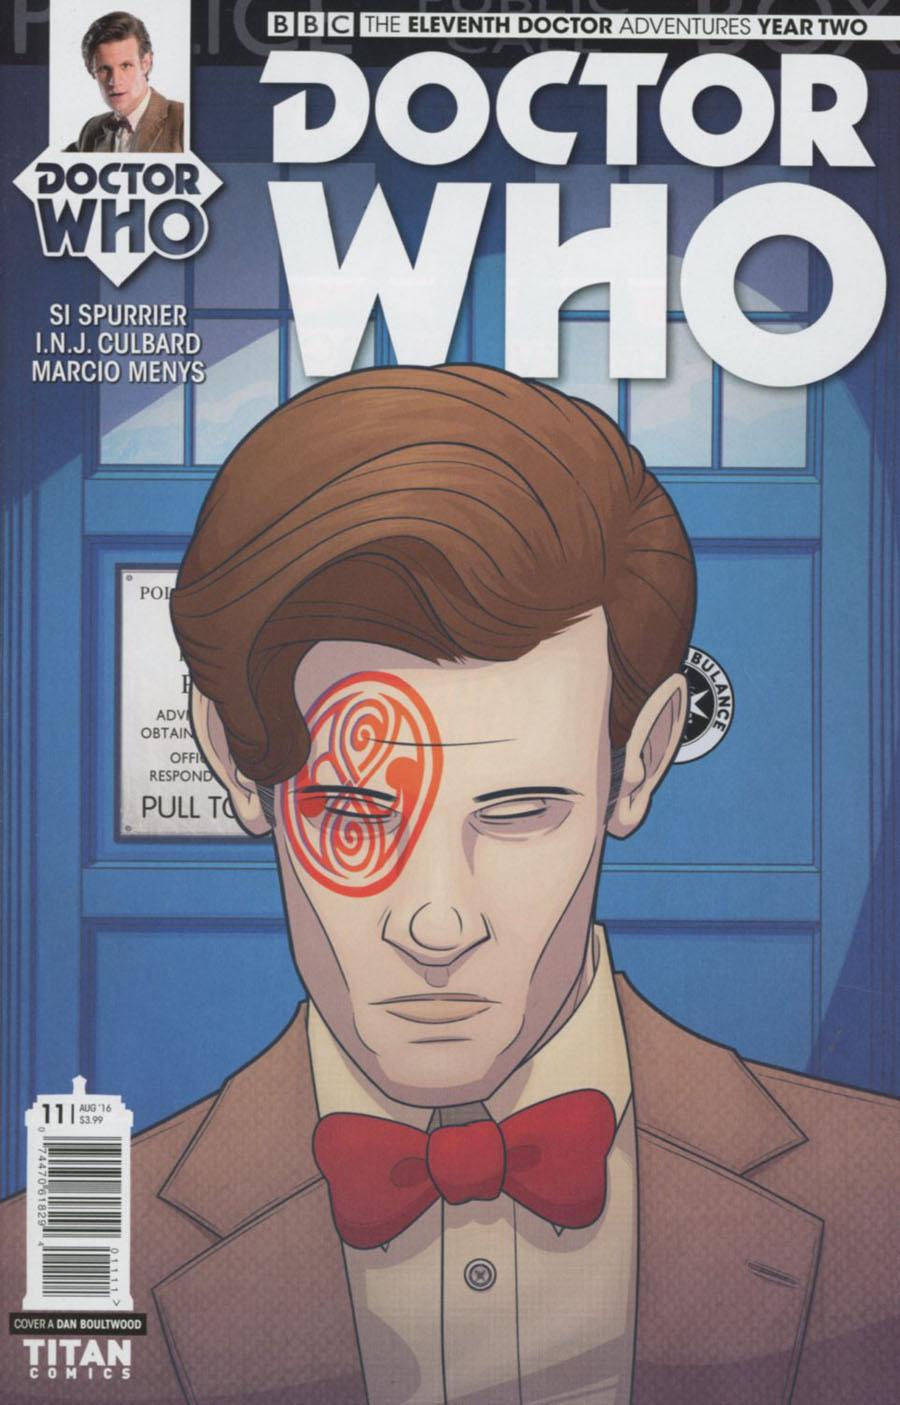 Doctor Who 11th Doctor Year Two Vol. 1 #11